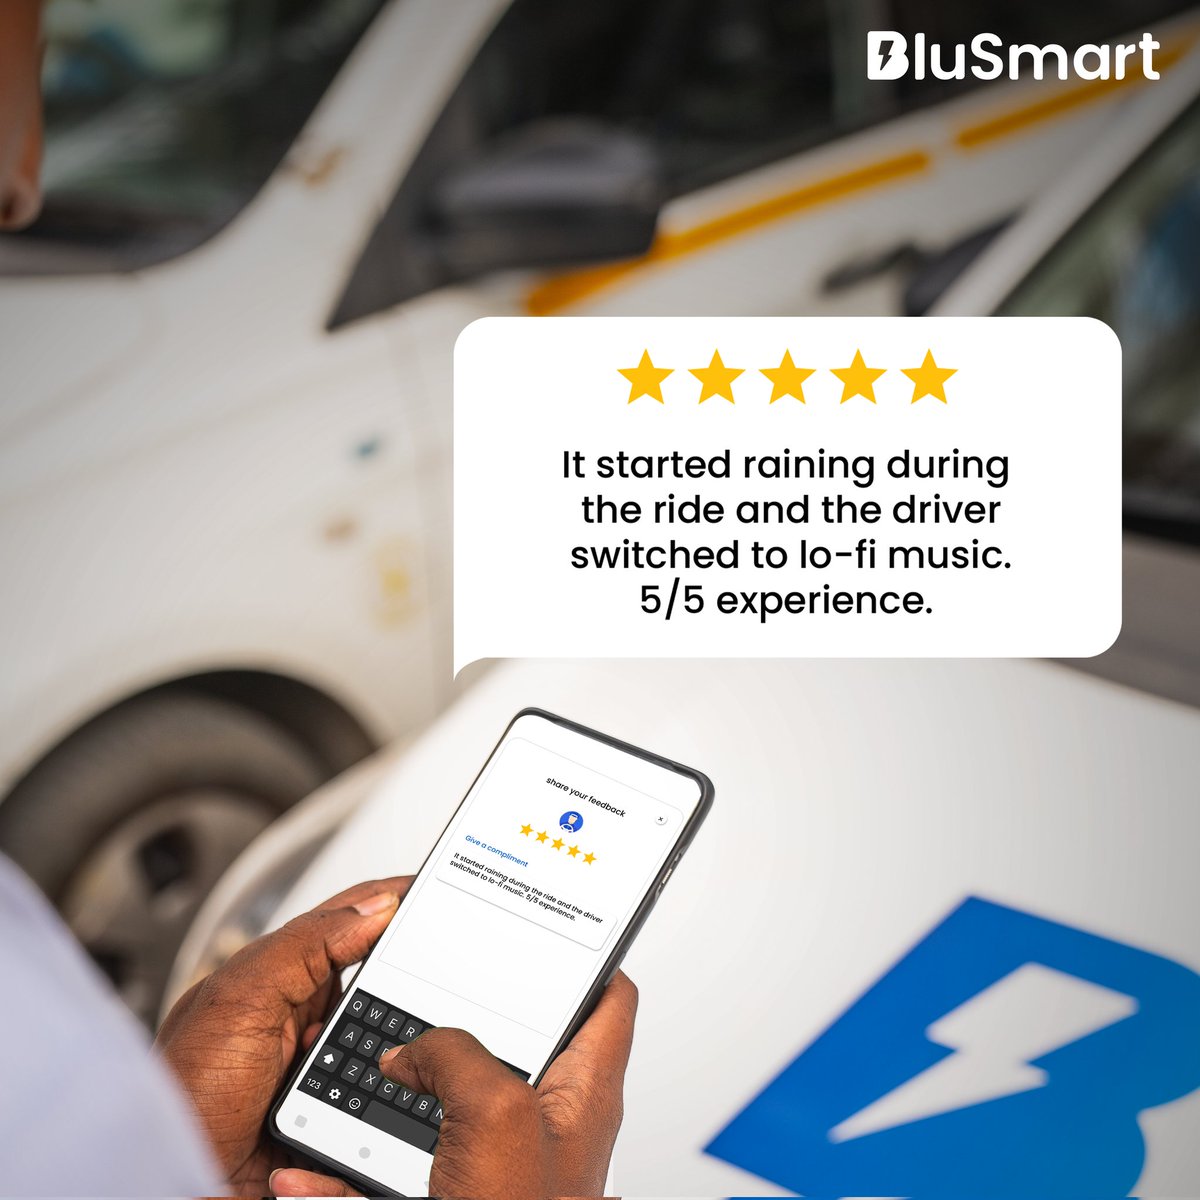 Name a more iconic duo, we'll wait. 😁

#BluSmart